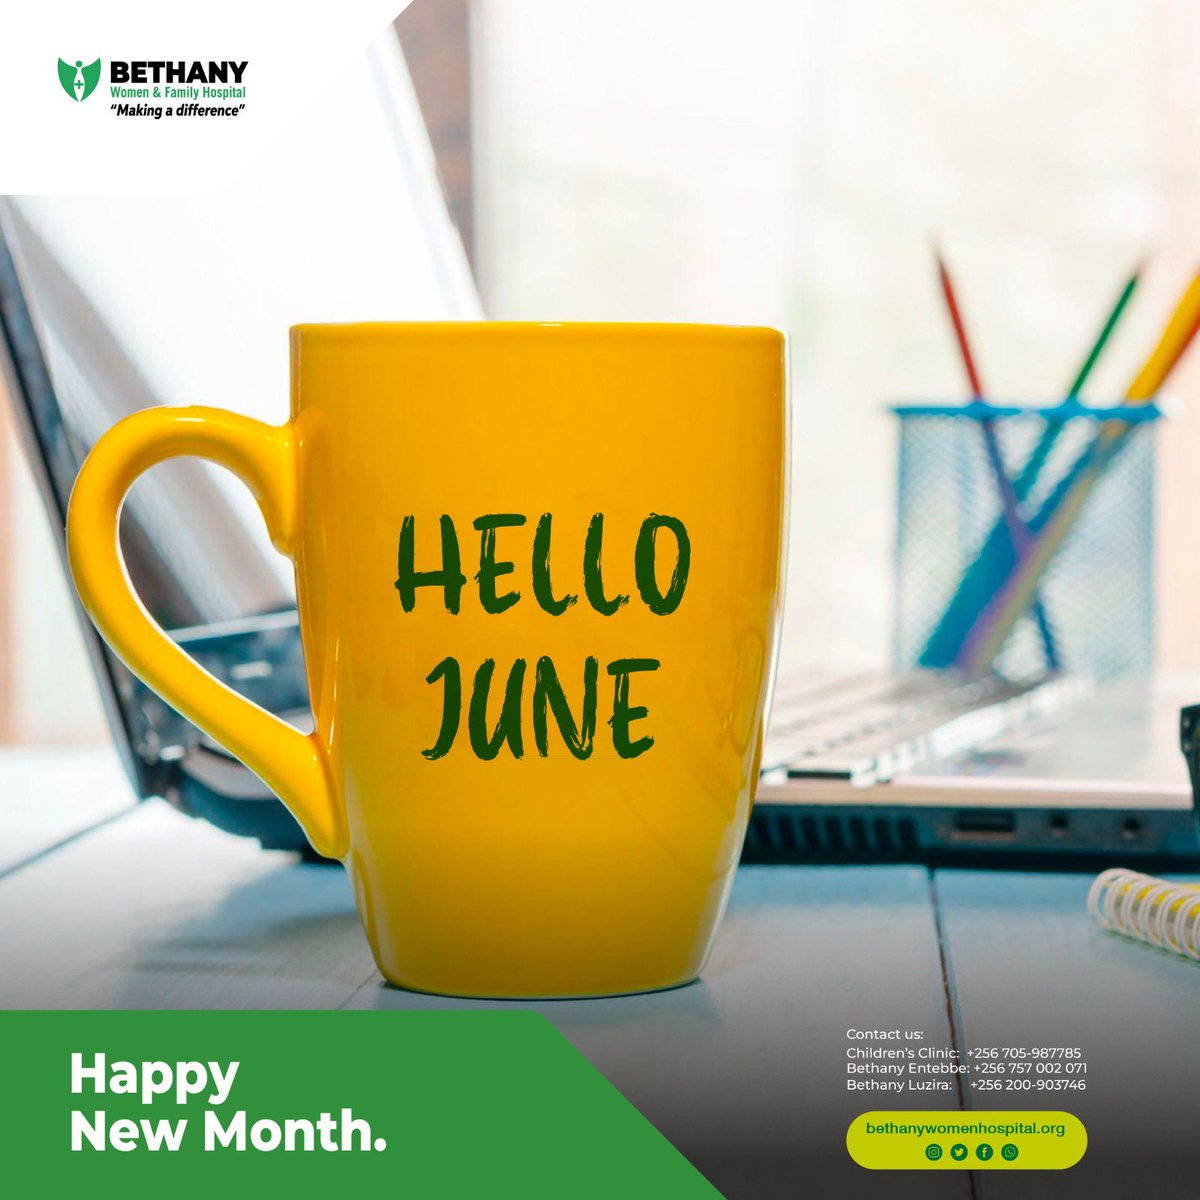 It’s never too late to plan for the future,
This month, we talk about family planning and contraception. Prepare to ask questions, share and learn. 
Happy New Month.

#HealthMatters